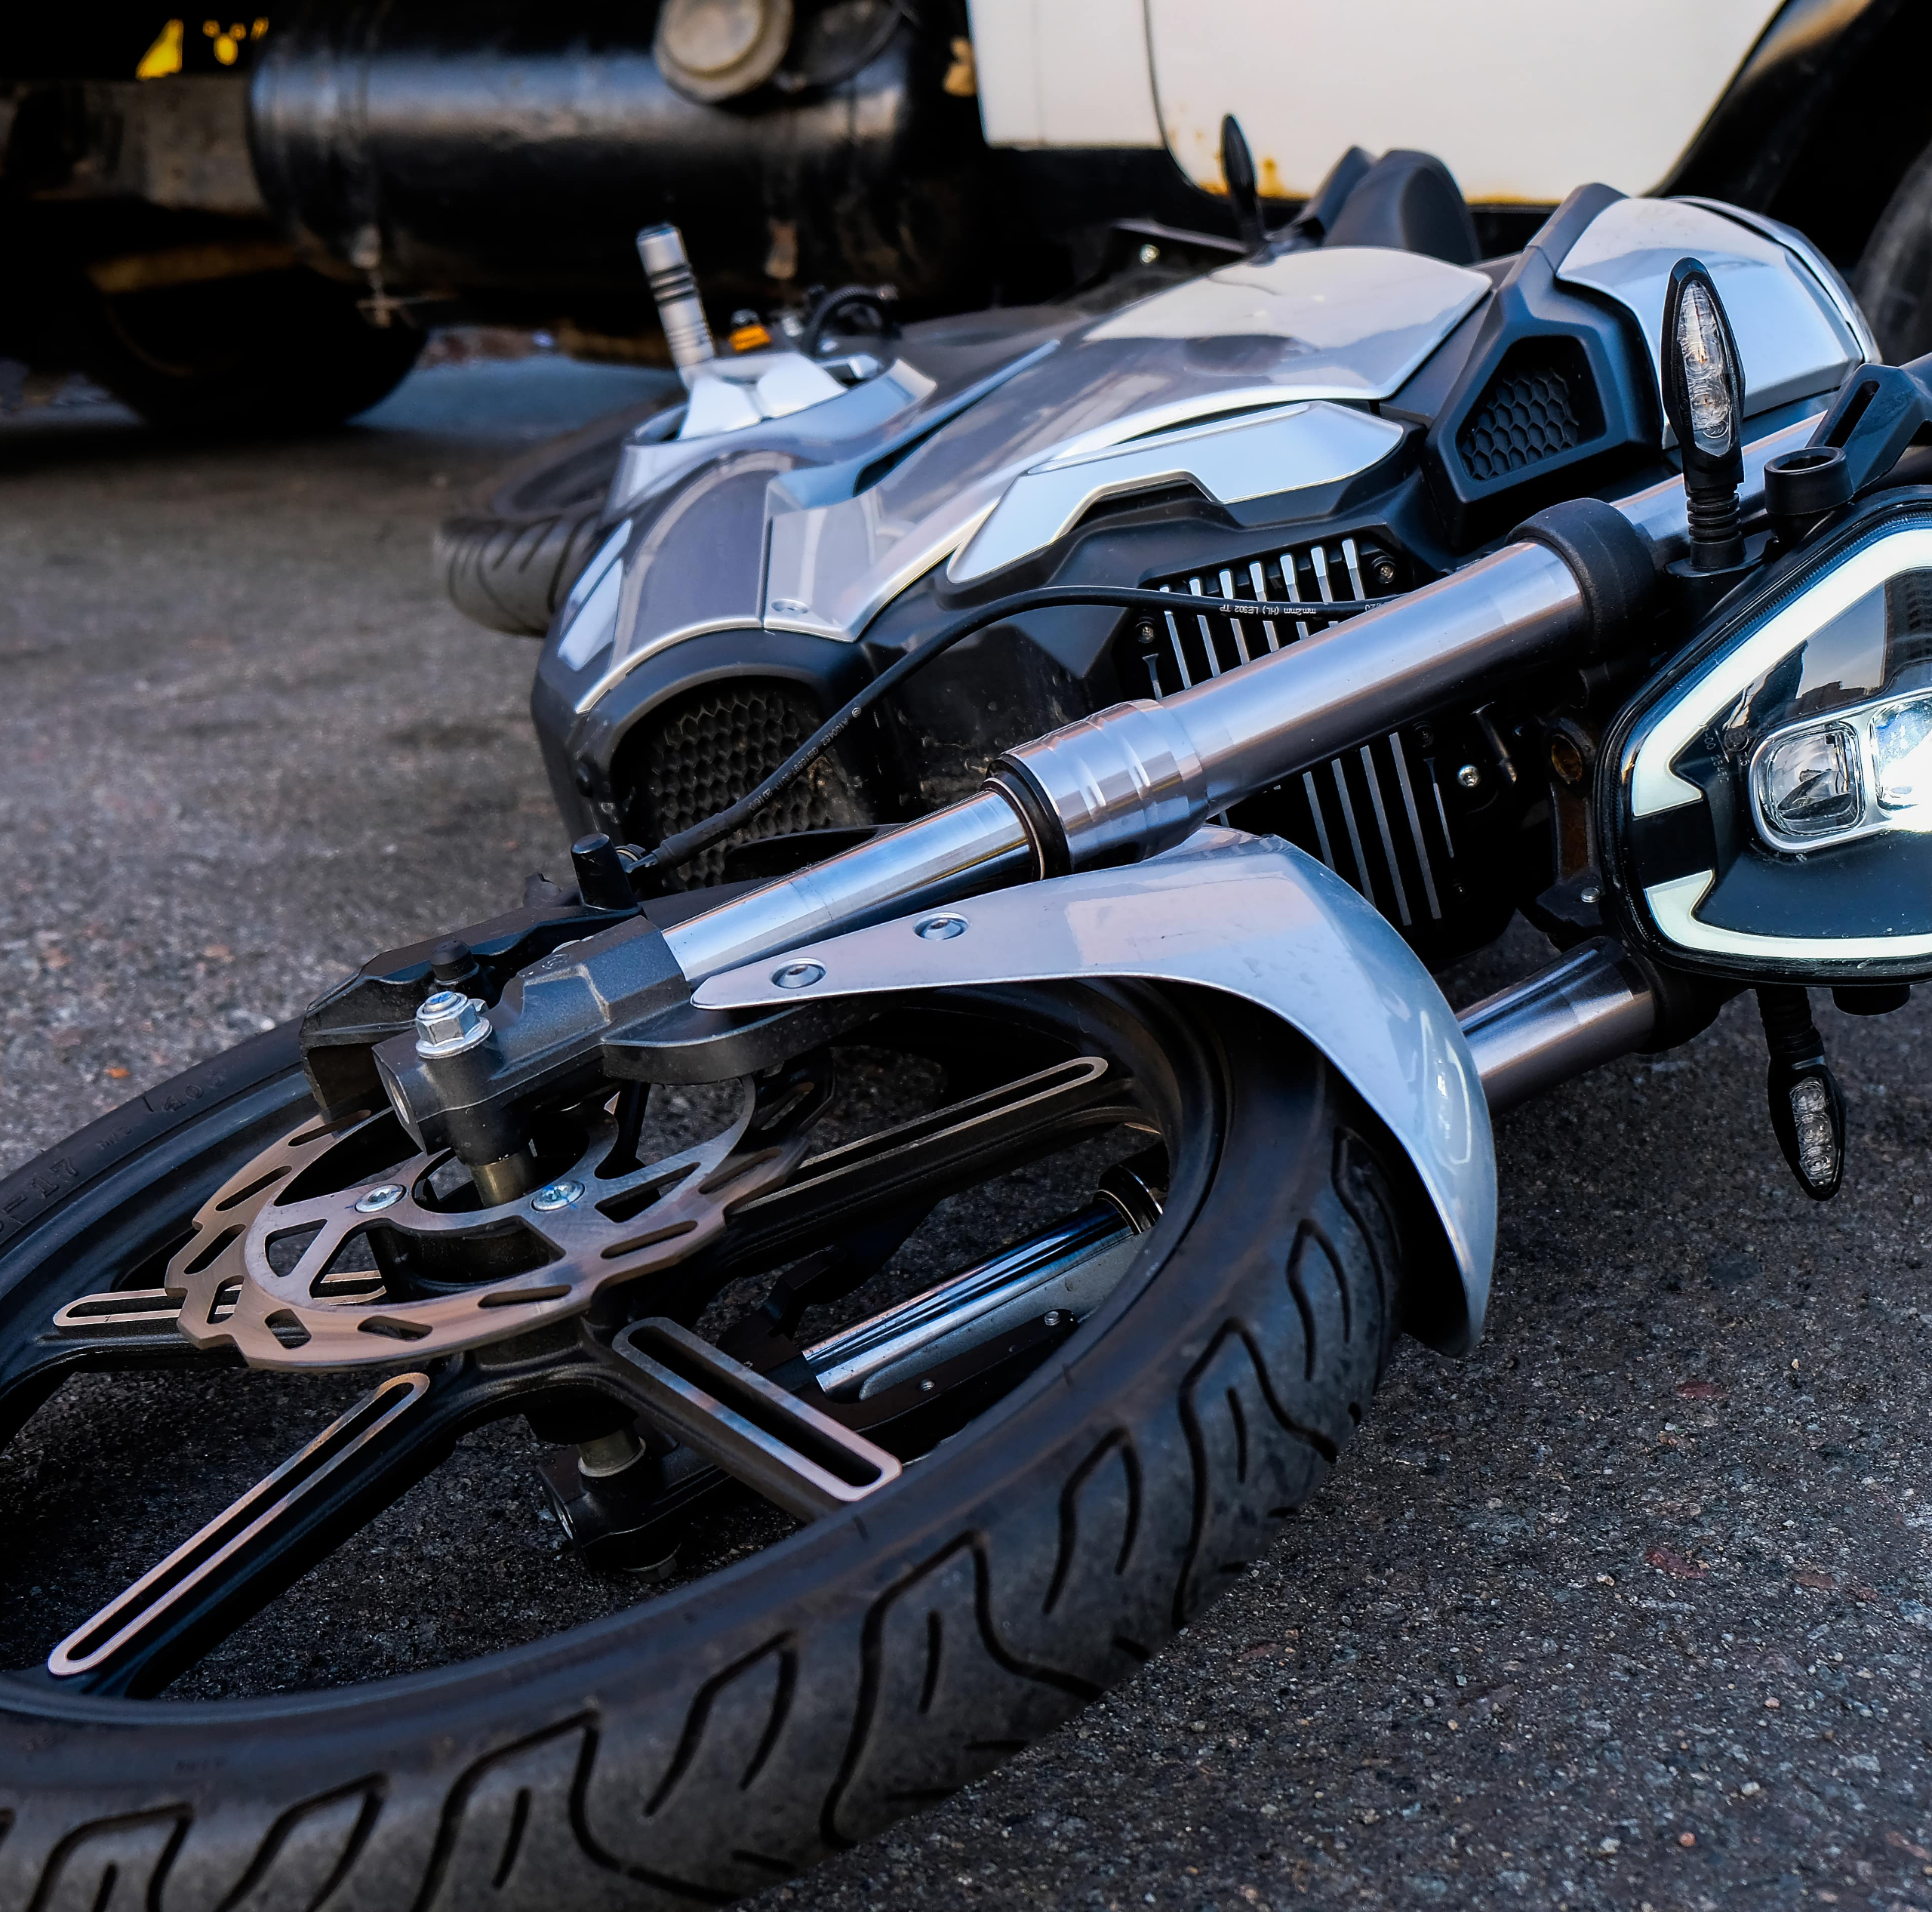 Cherry Hill Motorcycle Accident Attorney